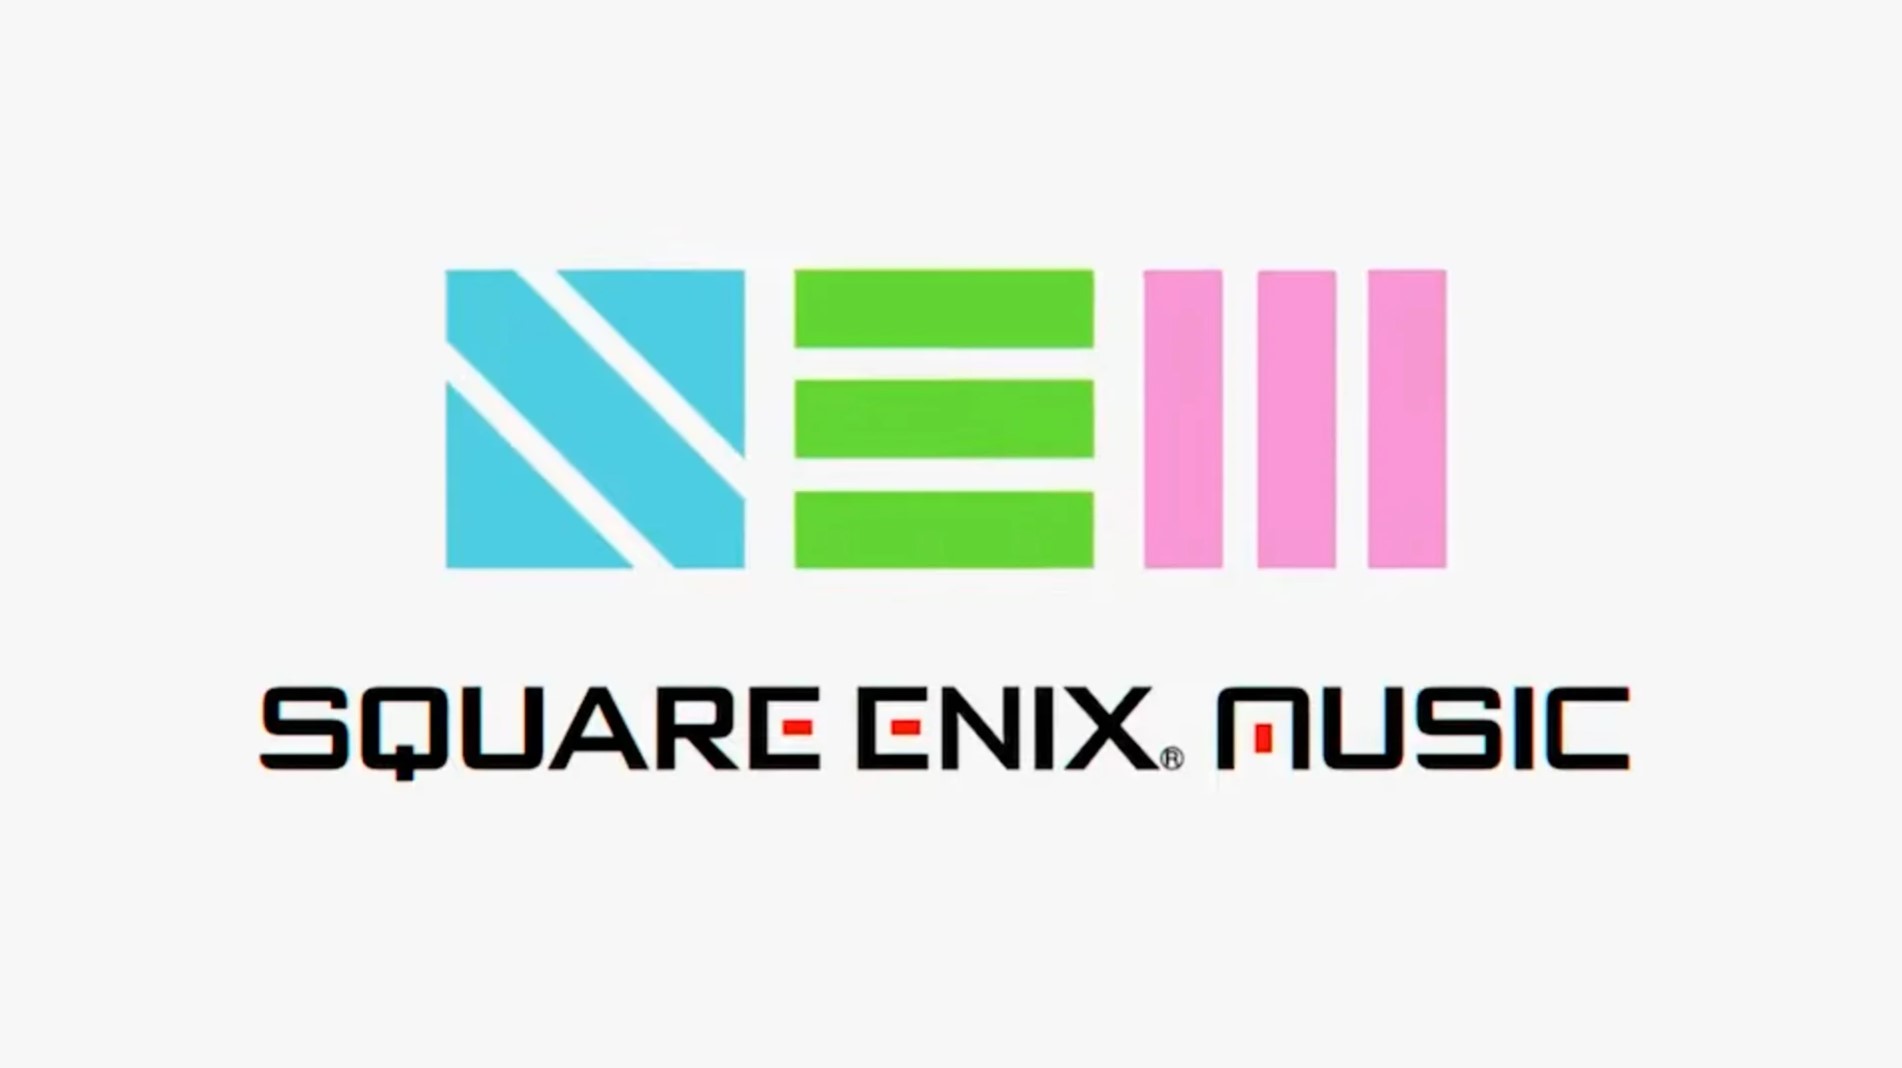 Square Enix Launches Official YouTube Music Channel With Over 5,500 Tracks